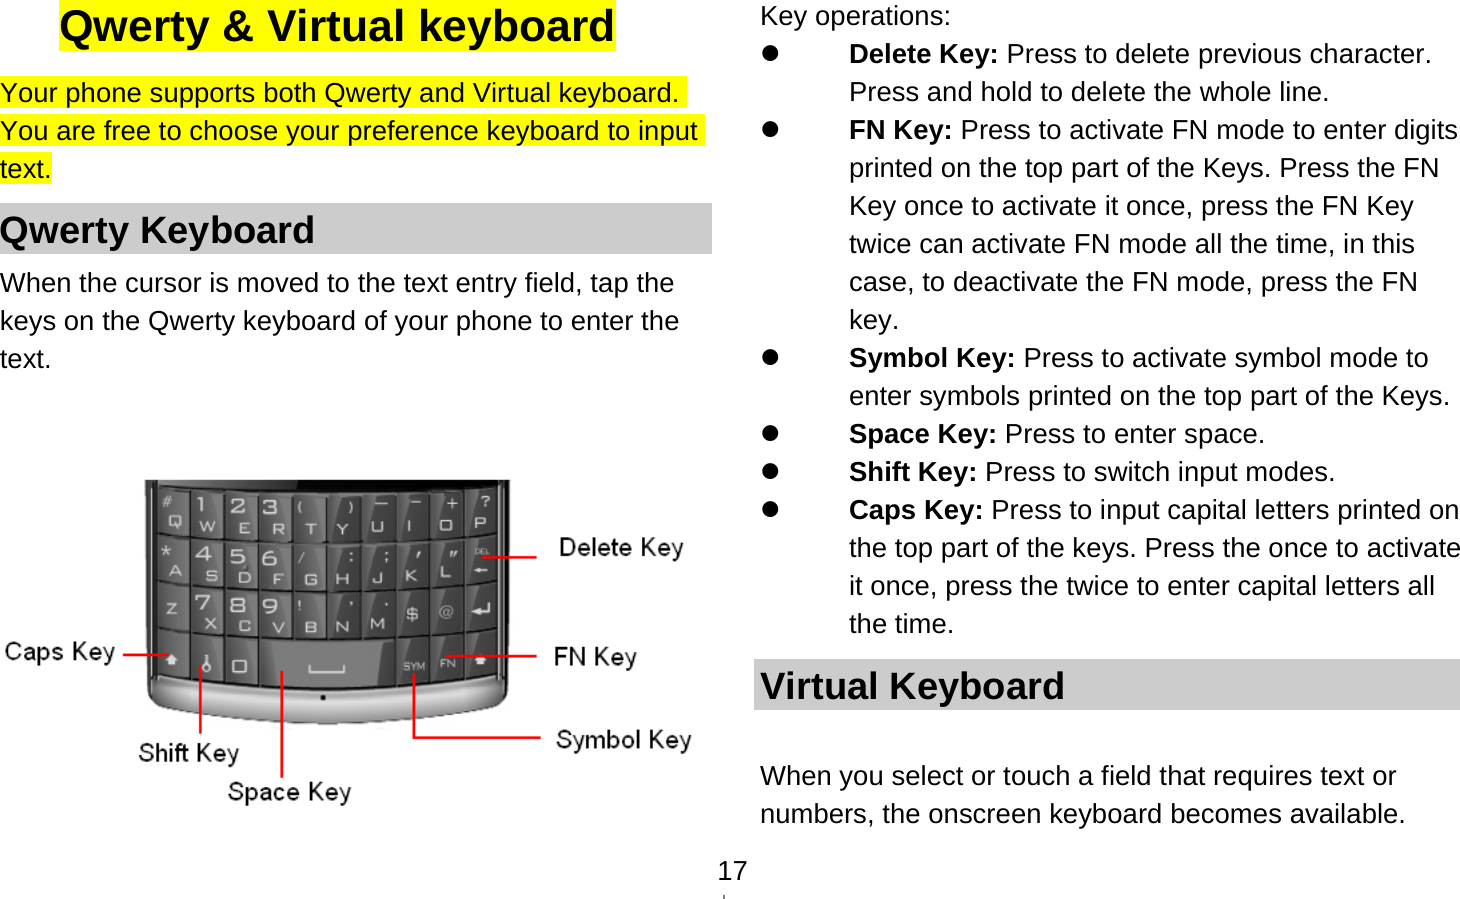   17Qwerty &amp; Virtual keyboard Your phone supports both Qwerty and Virtual keyboard. You are free to choose your preference keyboard to input text. Qwerty Keyboard When the cursor is moved to the text entry field, tap the keys on the Qwerty keyboard of your phone to enter the text.    Key operations:  Delete Key: Press to delete previous character. Press and hold to delete the whole line.  FN Key: Press to activate FN mode to enter digits printed on the top part of the Keys. Press the FN Key once to activate it once, press the FN Key twice can activate FN mode all the time, in this case, to deactivate the FN mode, press the FN key.  Symbol Key: Press to activate symbol mode to enter symbols printed on the top part of the Keys.  Space Key: Press to enter space.  Shift Key: Press to switch input modes.  Caps Key: Press to input capital letters printed on the top part of the keys. Press the once to activate it once, press the twice to enter capital letters all the time. Virtual Keyboard  When you select or touch a field that requires text or numbers, the onscreen keyboard becomes available. 